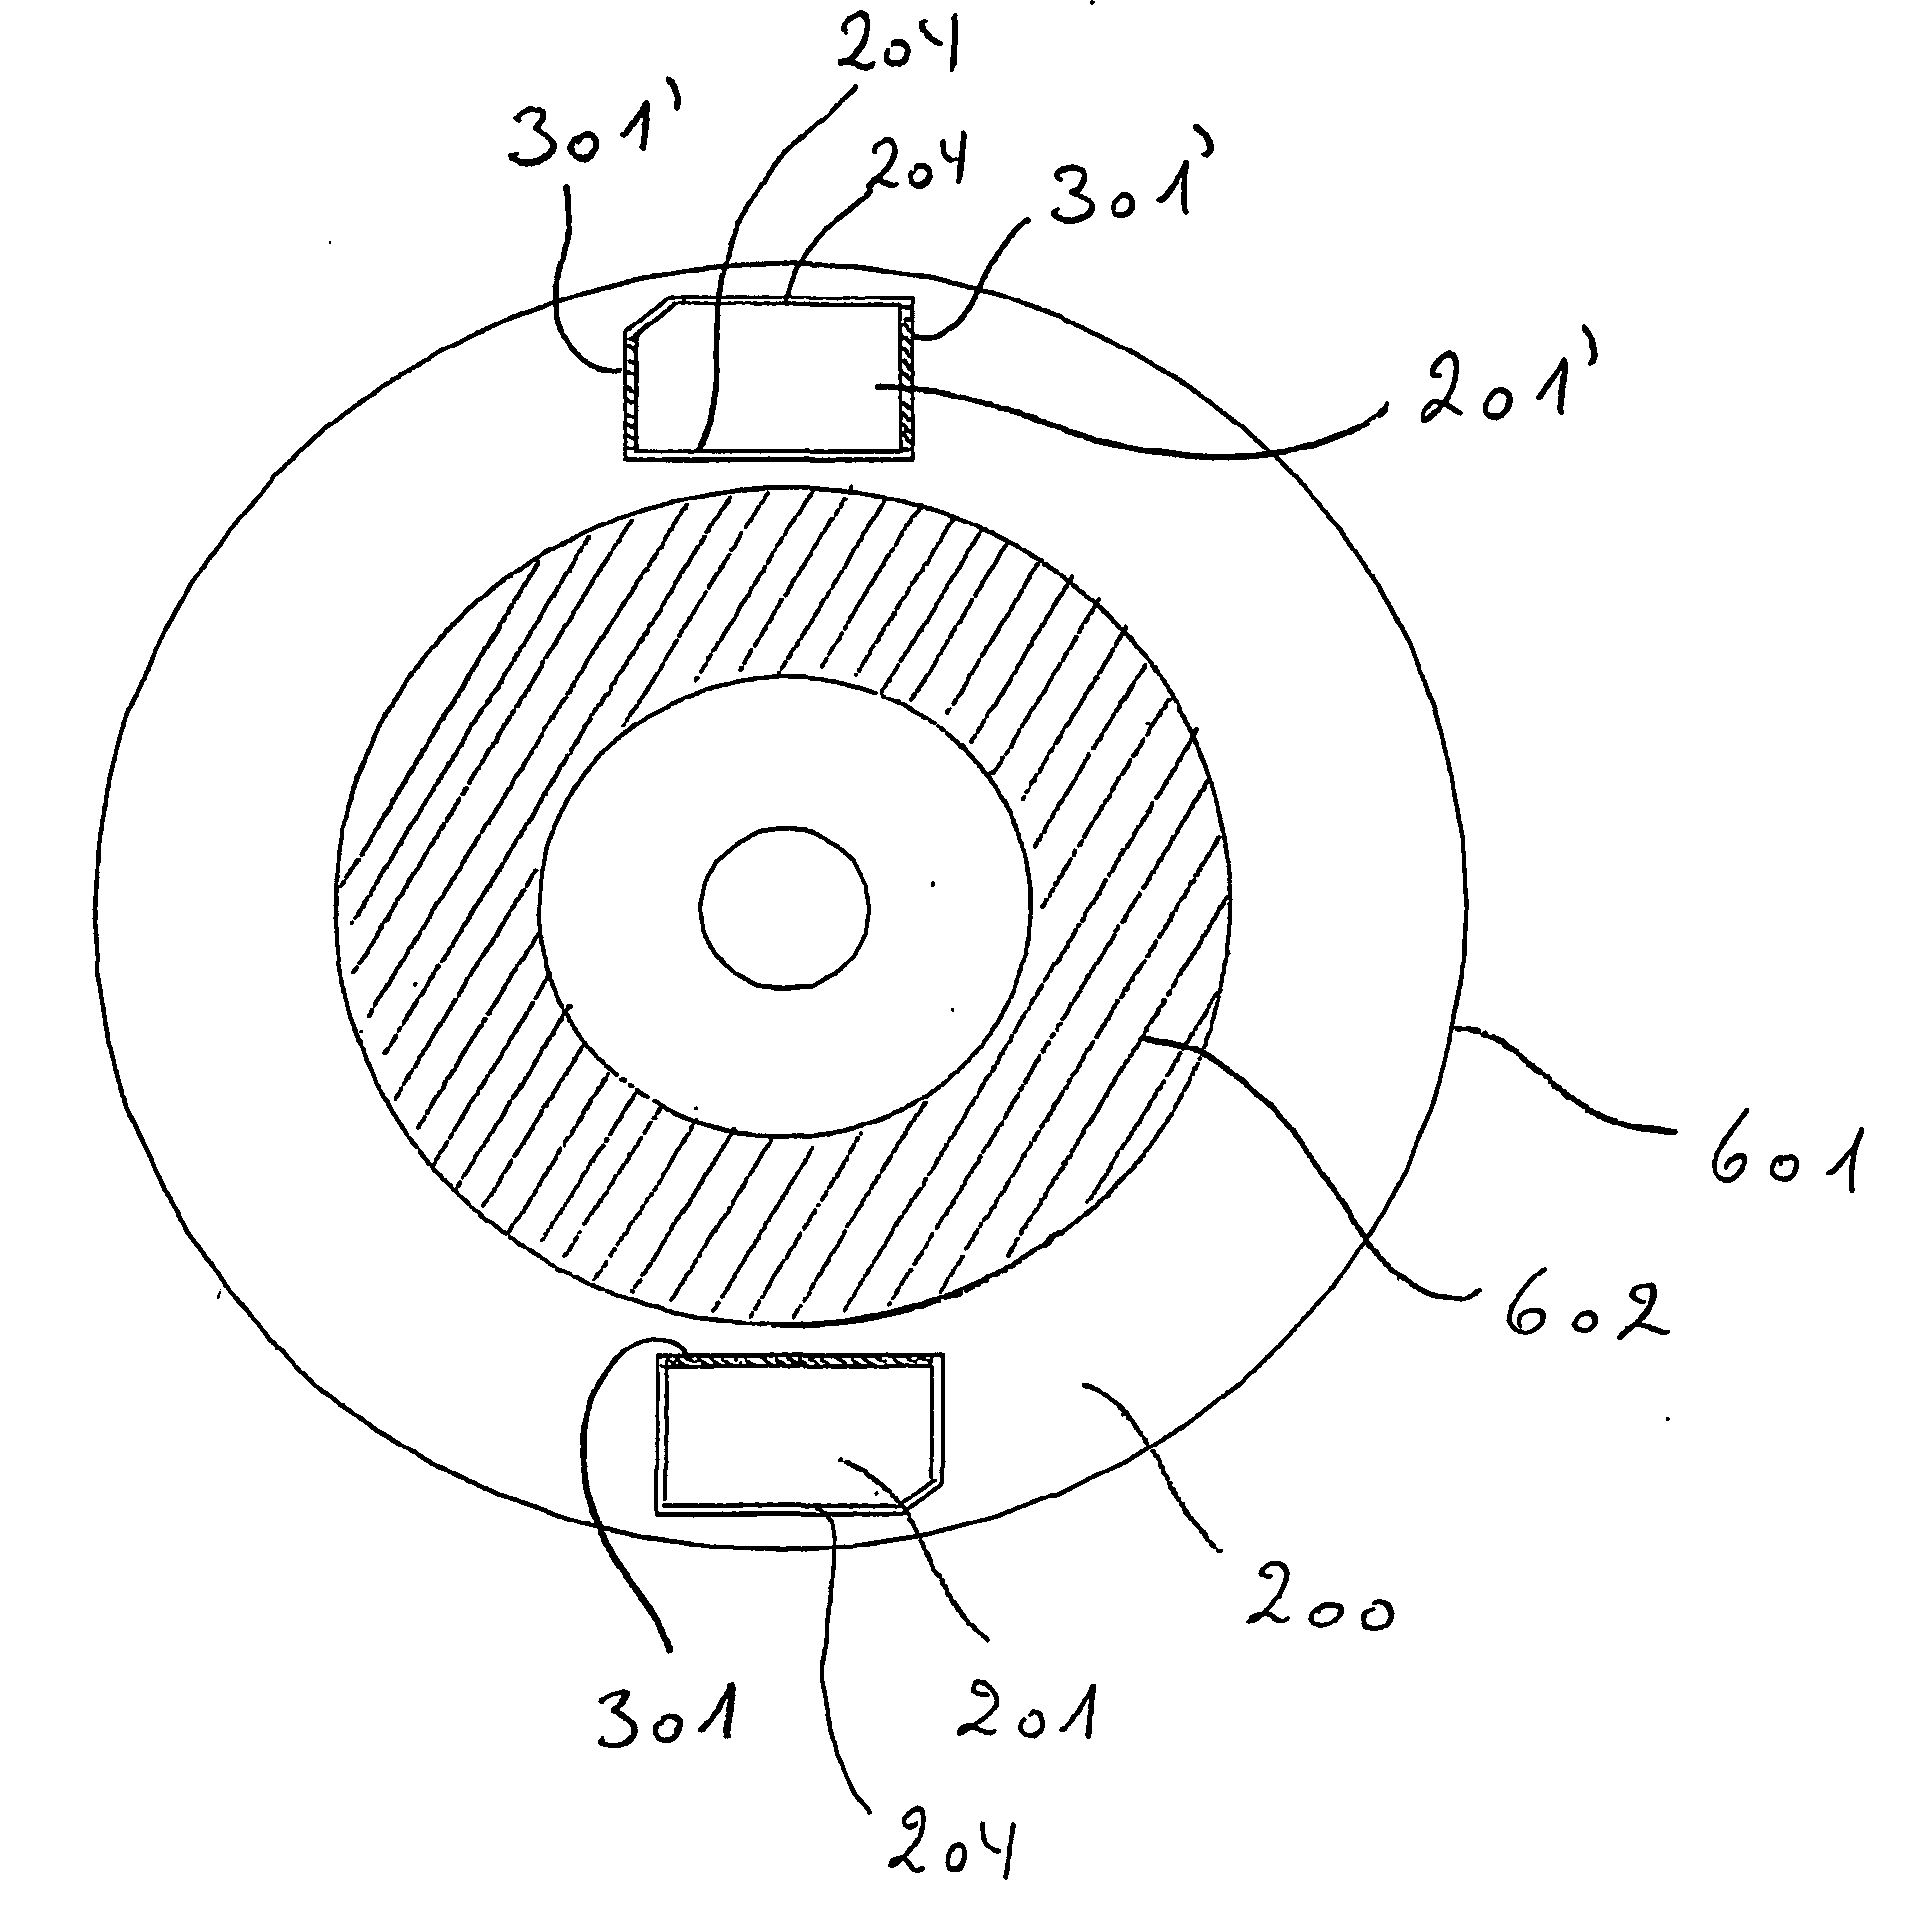 Method for production of an optical disc with a detachable module